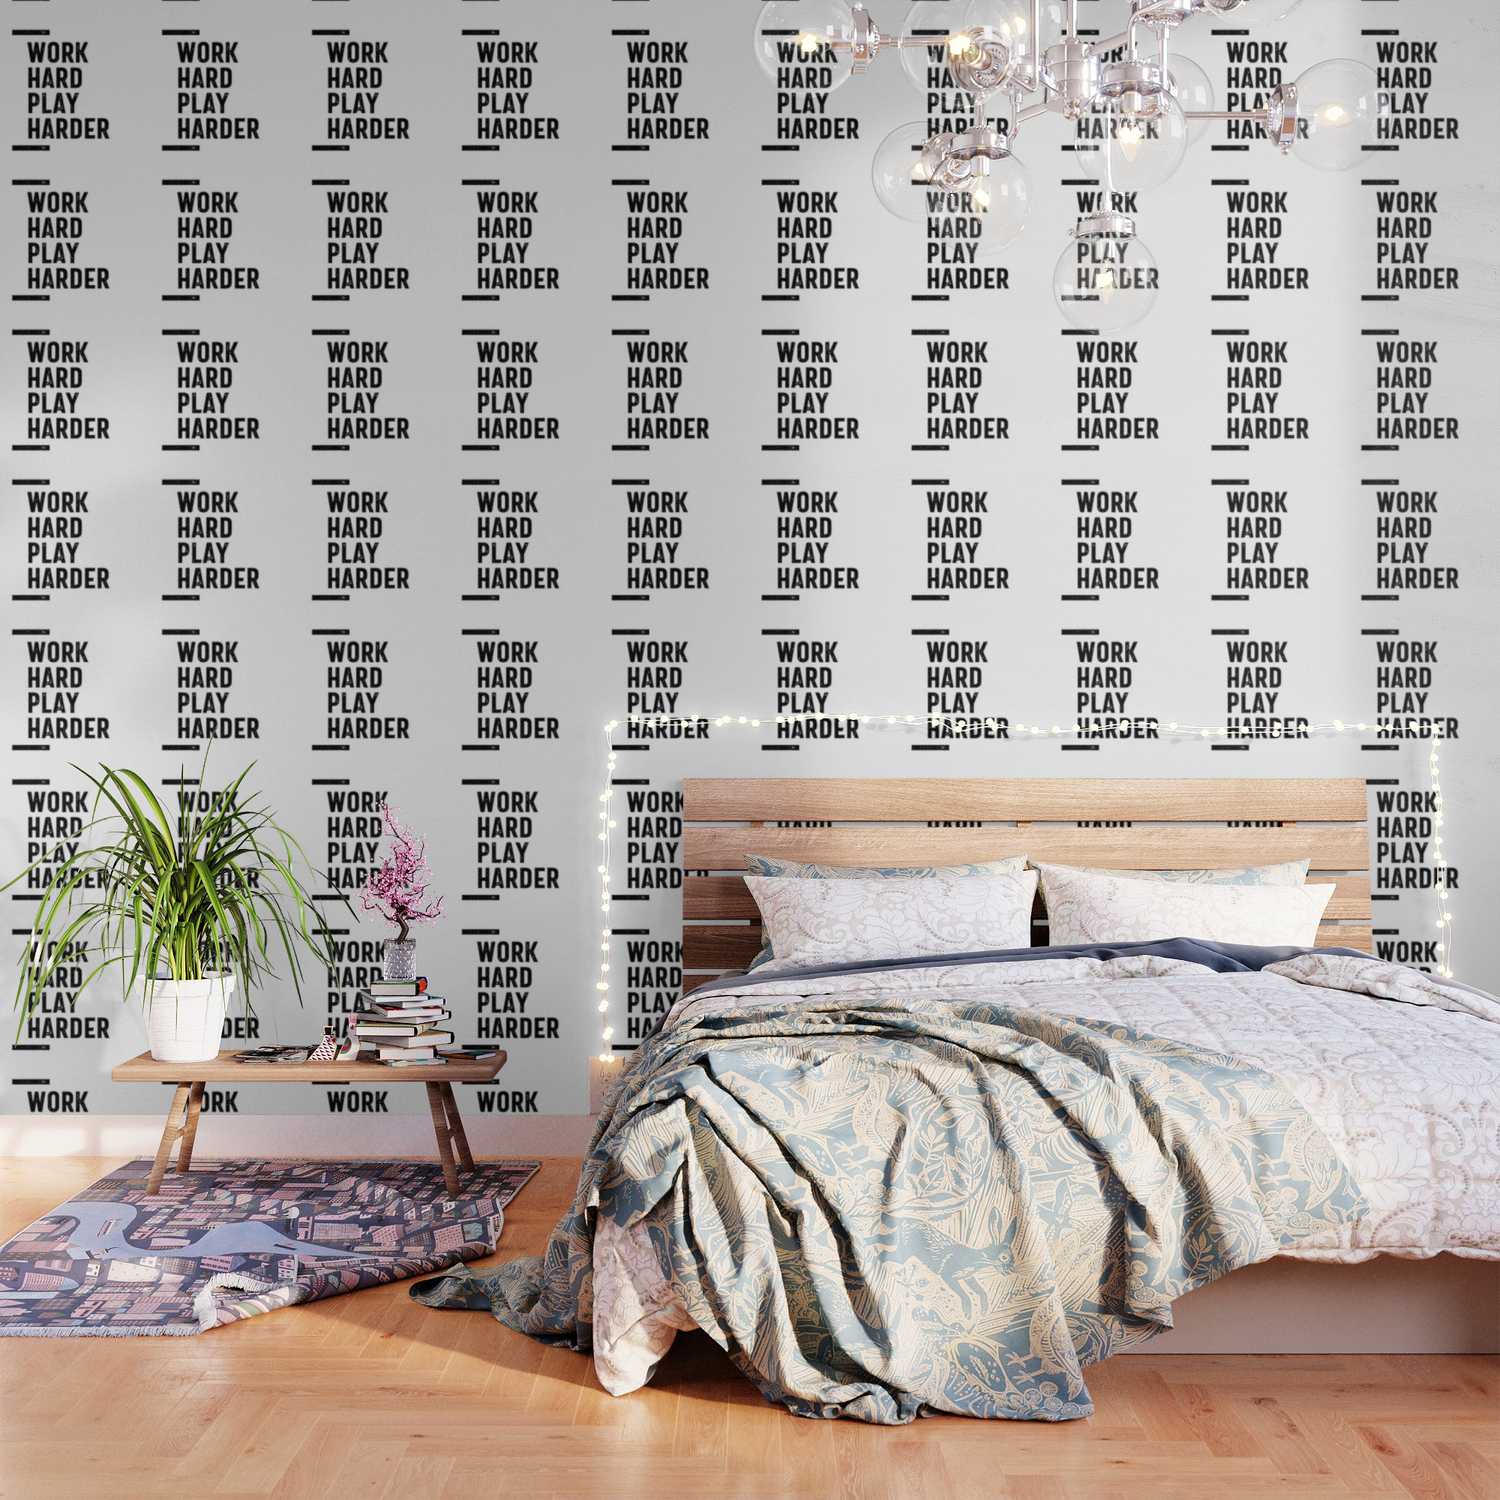 Work Hard Play Harder - Motivational Gift Wallpaper by Cido Lopez | Society6